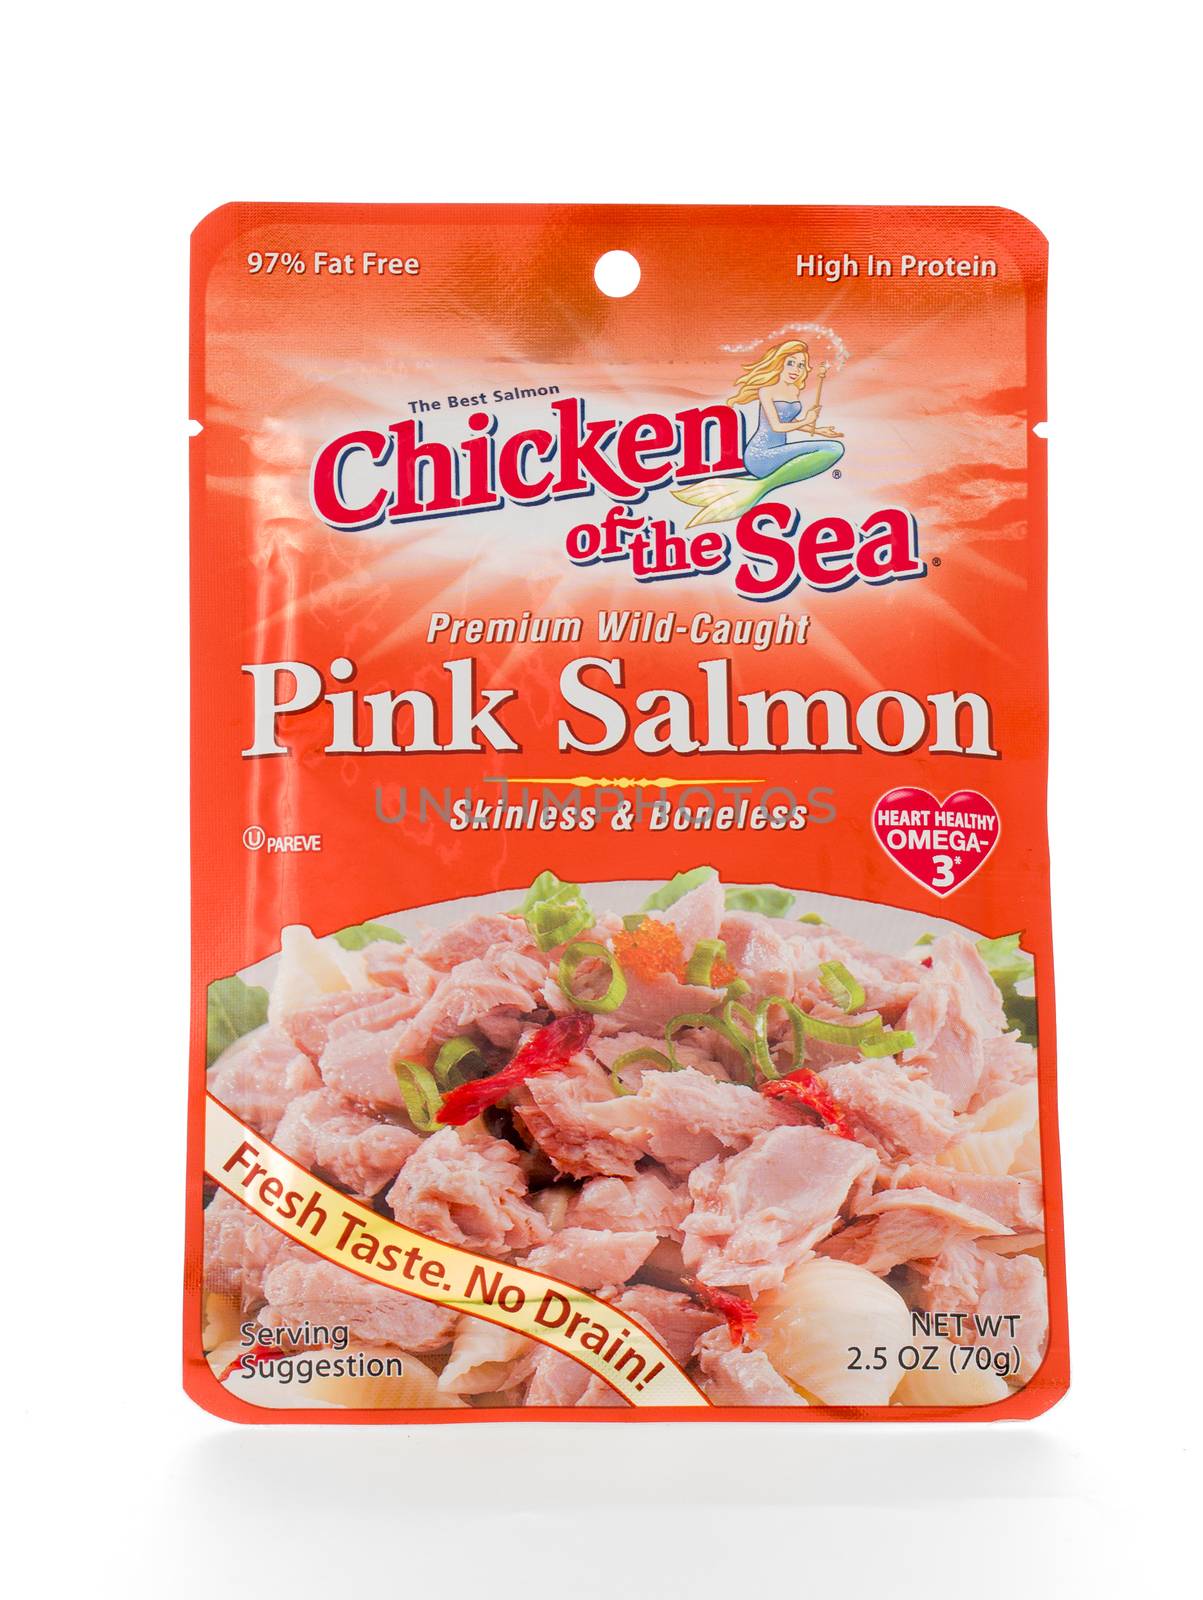 Winneconne, WI - 7 February 2015: Pouch of Pink Salmon made by Chicken of the Sea.